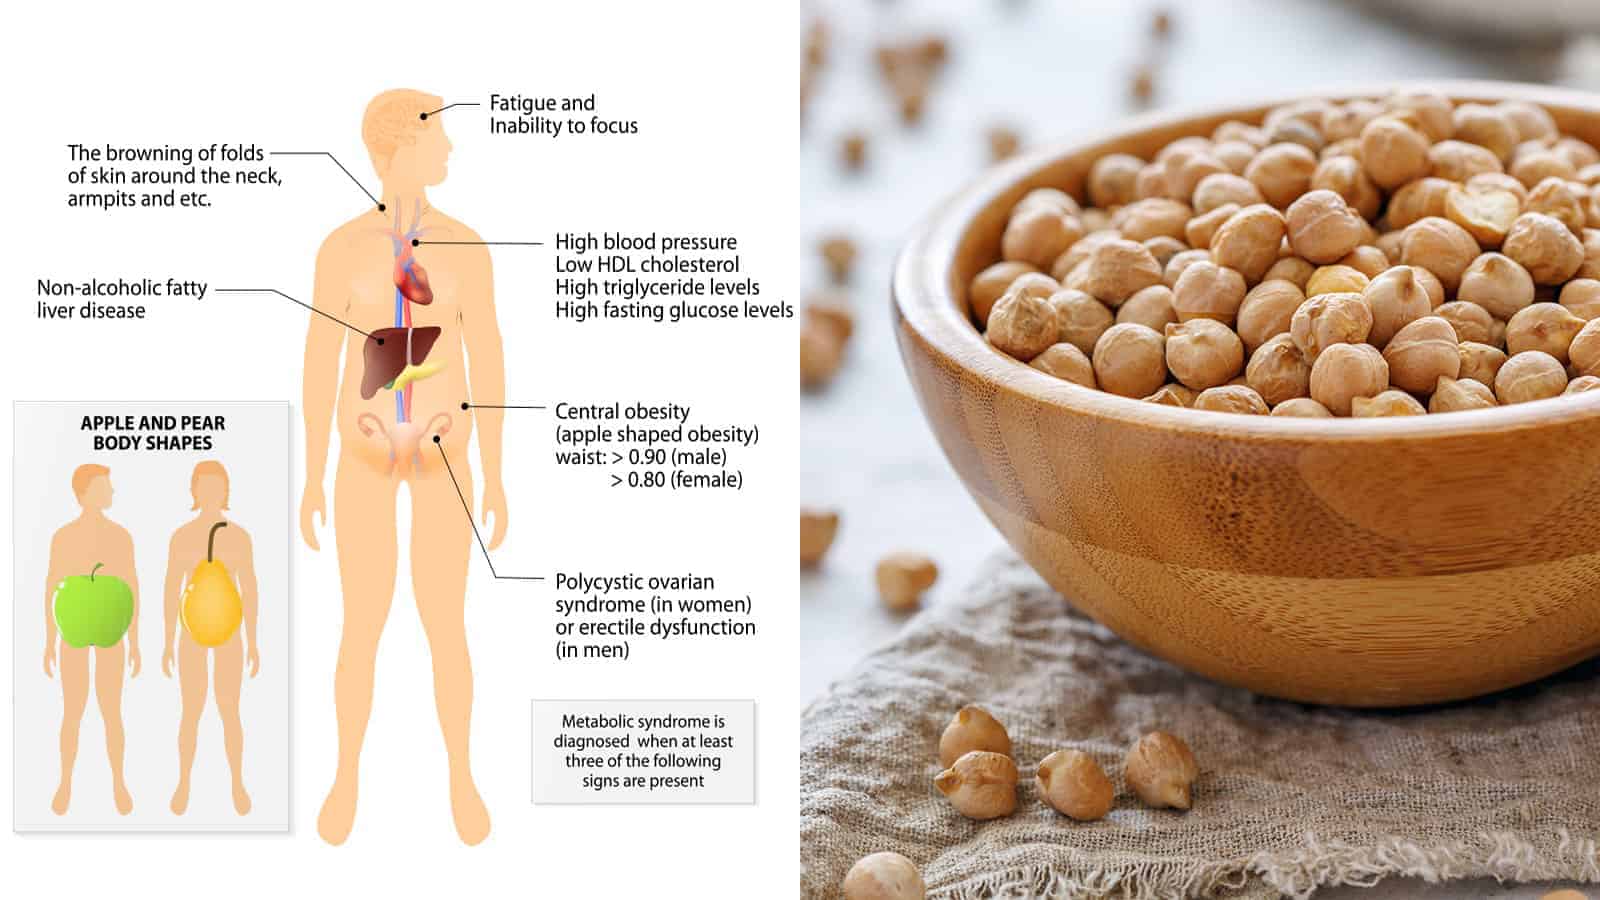 Scientists Explain 10 Things That Happen to Your Body When You Eat Chickpeas Every Day